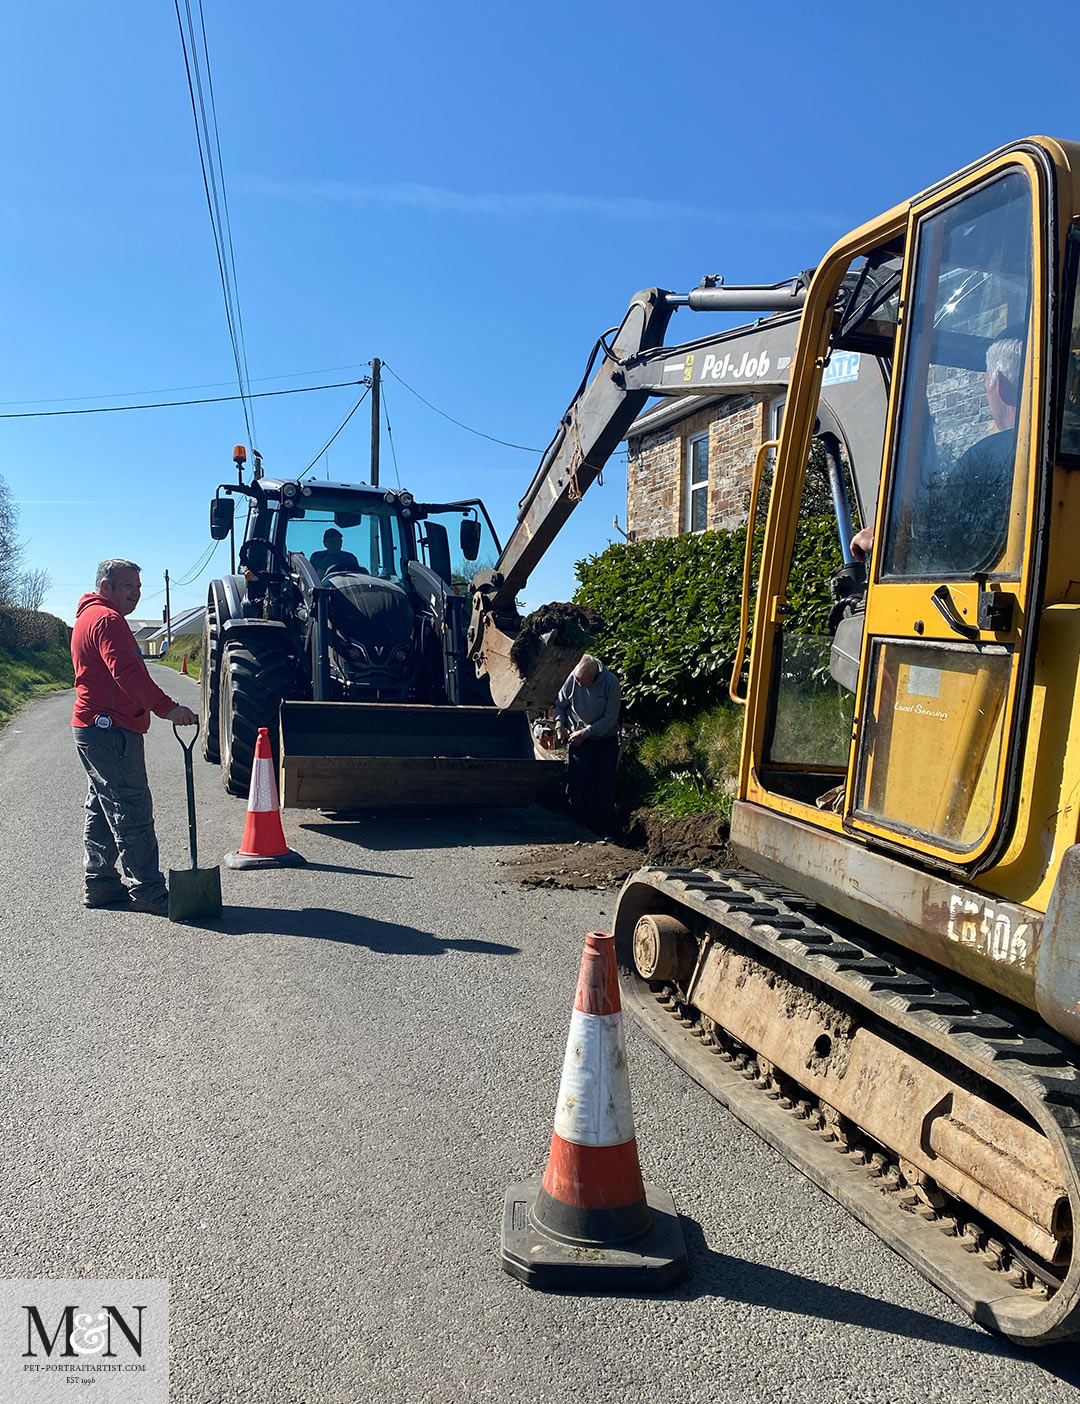 The digger arrived! Melanie’s April Monthly News